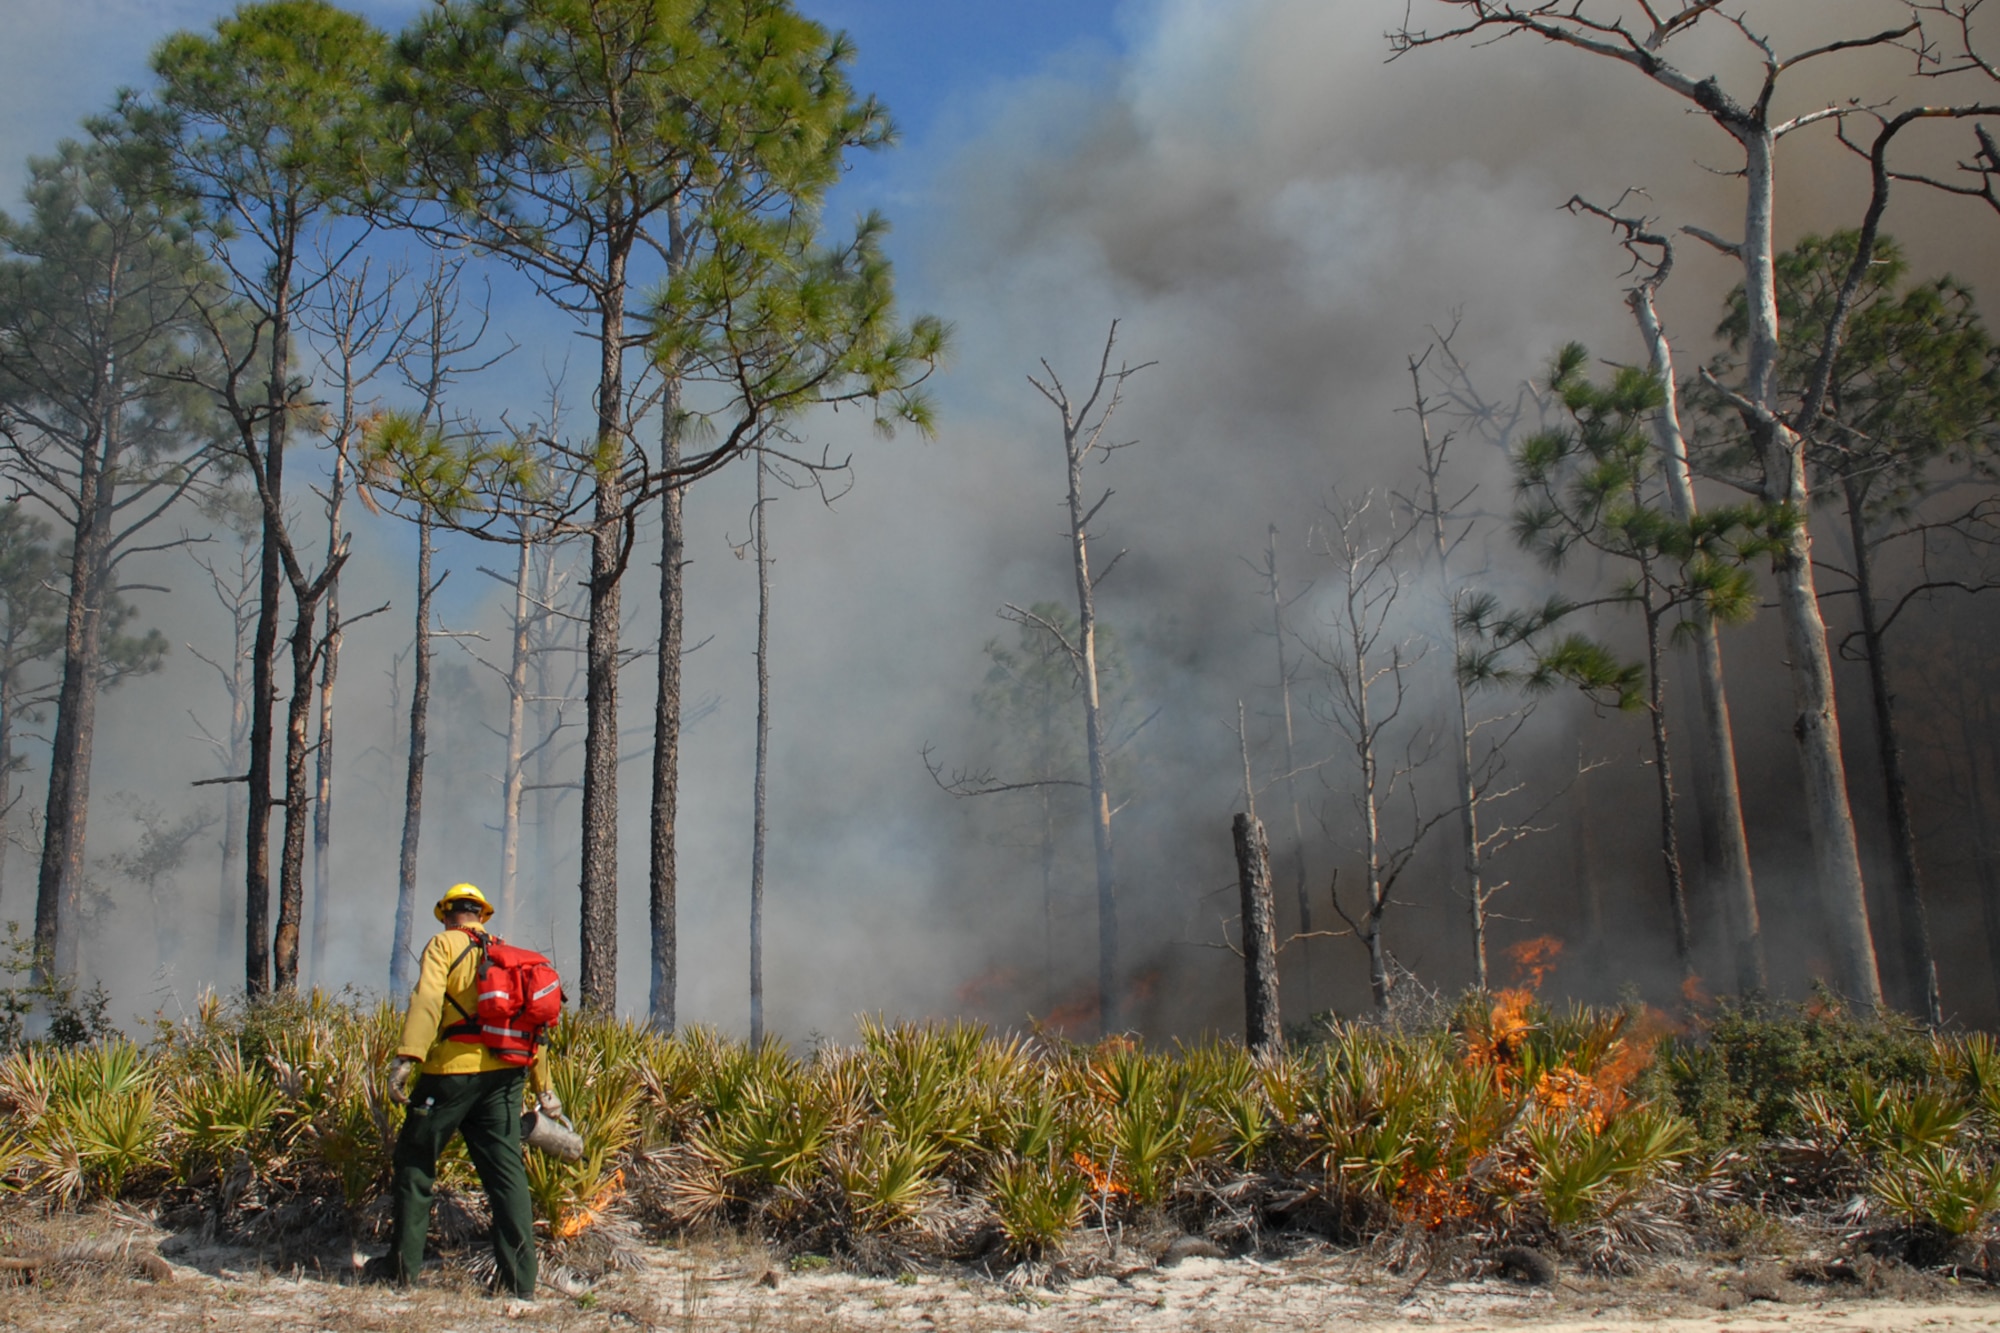 EGLIN AIR FORCE BASE, Fla. -- David Grimm, a Jackson Guard forestry technician and wildland fire specialist, uses a fire drip can to start a fire line during a prescribed burn at White Point, an 85-acre recreation area on the Choctawhatchee Bay Jan. 29. Many native plants and animal species depend on Eglin's fire-dependent long-leaf pine ecosystem, 11 of which are federally protected. Endangered species such as the red-cockaded woodpecker, depend on fire that is typically caused by either lightning strikes or Eglin's resident fire managers to survive. As of the 2008 control burn season, Jackson Guard's five-year average is 73,000 acres burned annually. (U.S. Air Force Photo by Staff Sgt. Mike Meares)